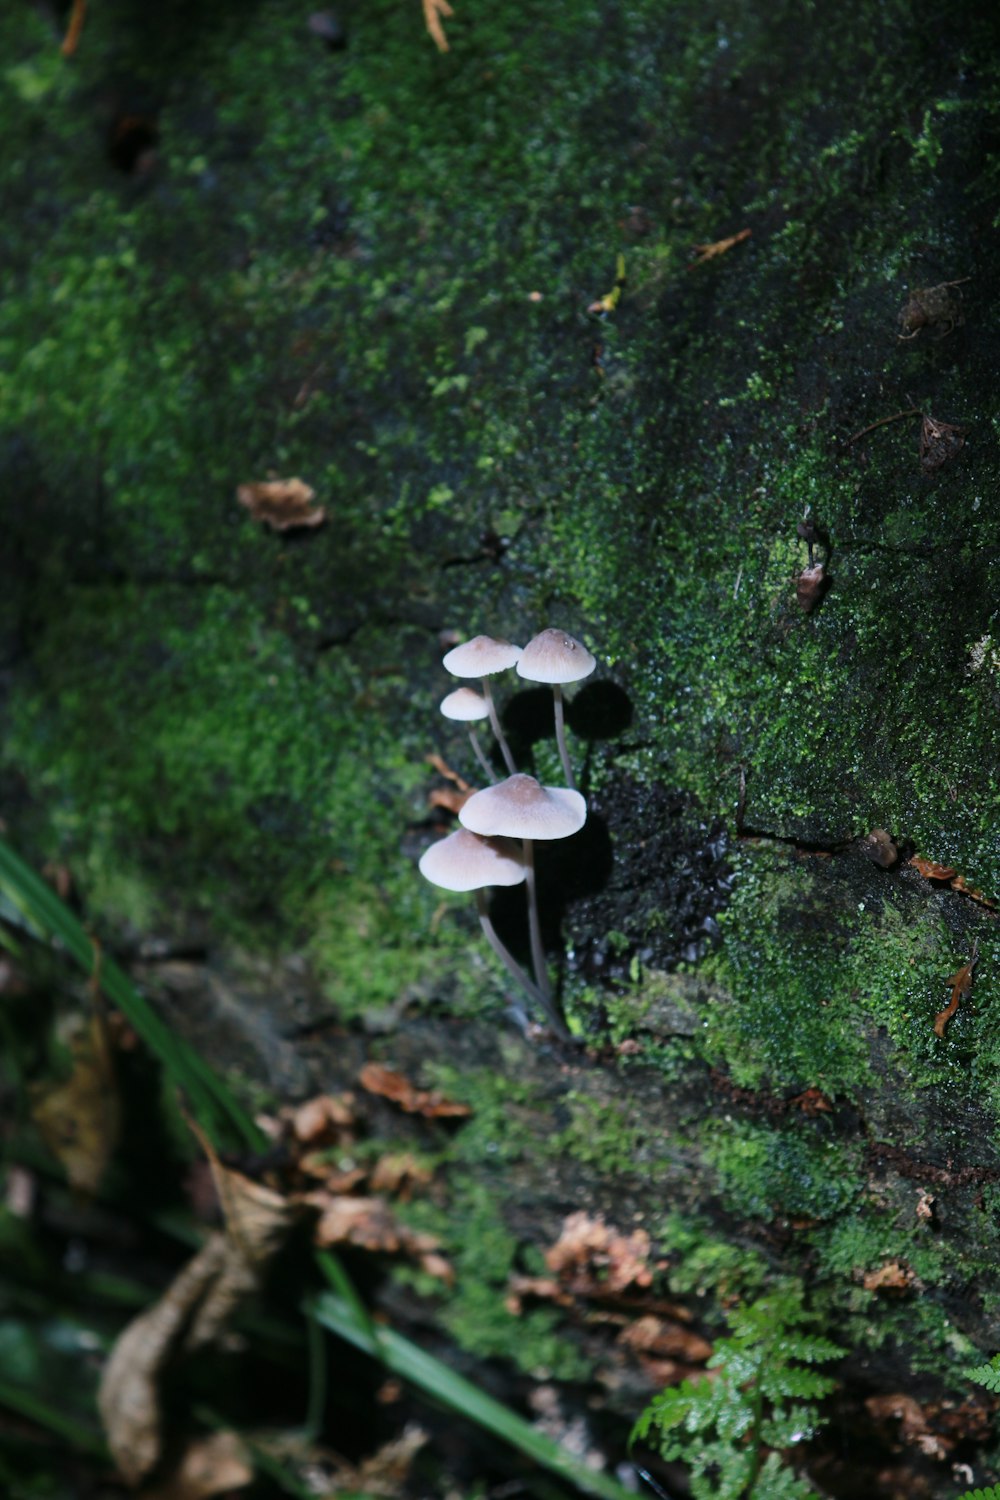 a group of mushrooms growing on the side of a mossy wall